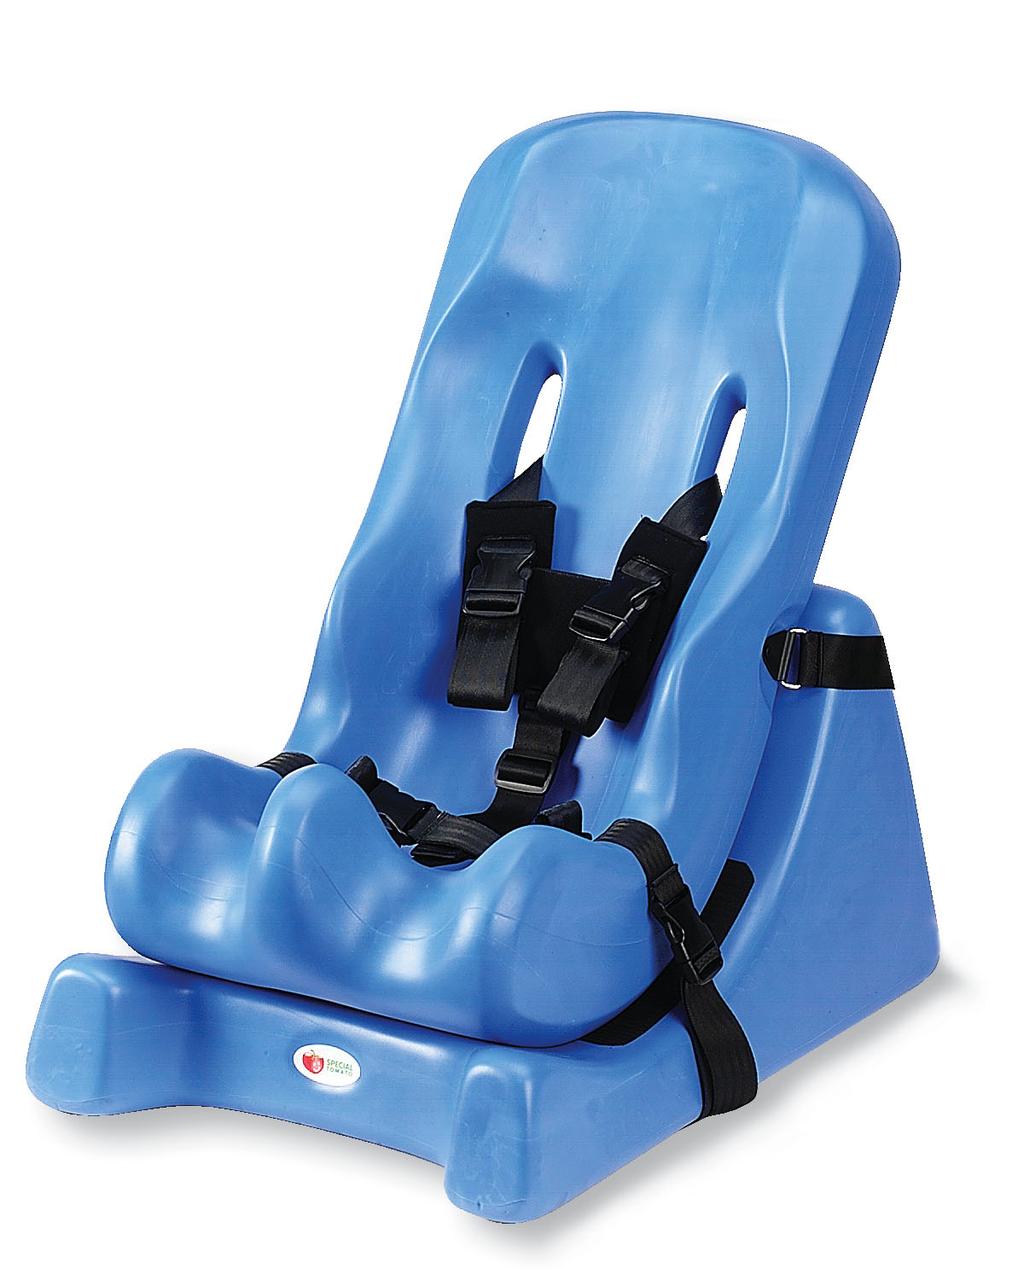 Sitter only Sitter with Mobile Tilt Wedge Kit Soft-Touch Sitters These soft, supportive Sitters provide comfortable, affordable alternative seating.